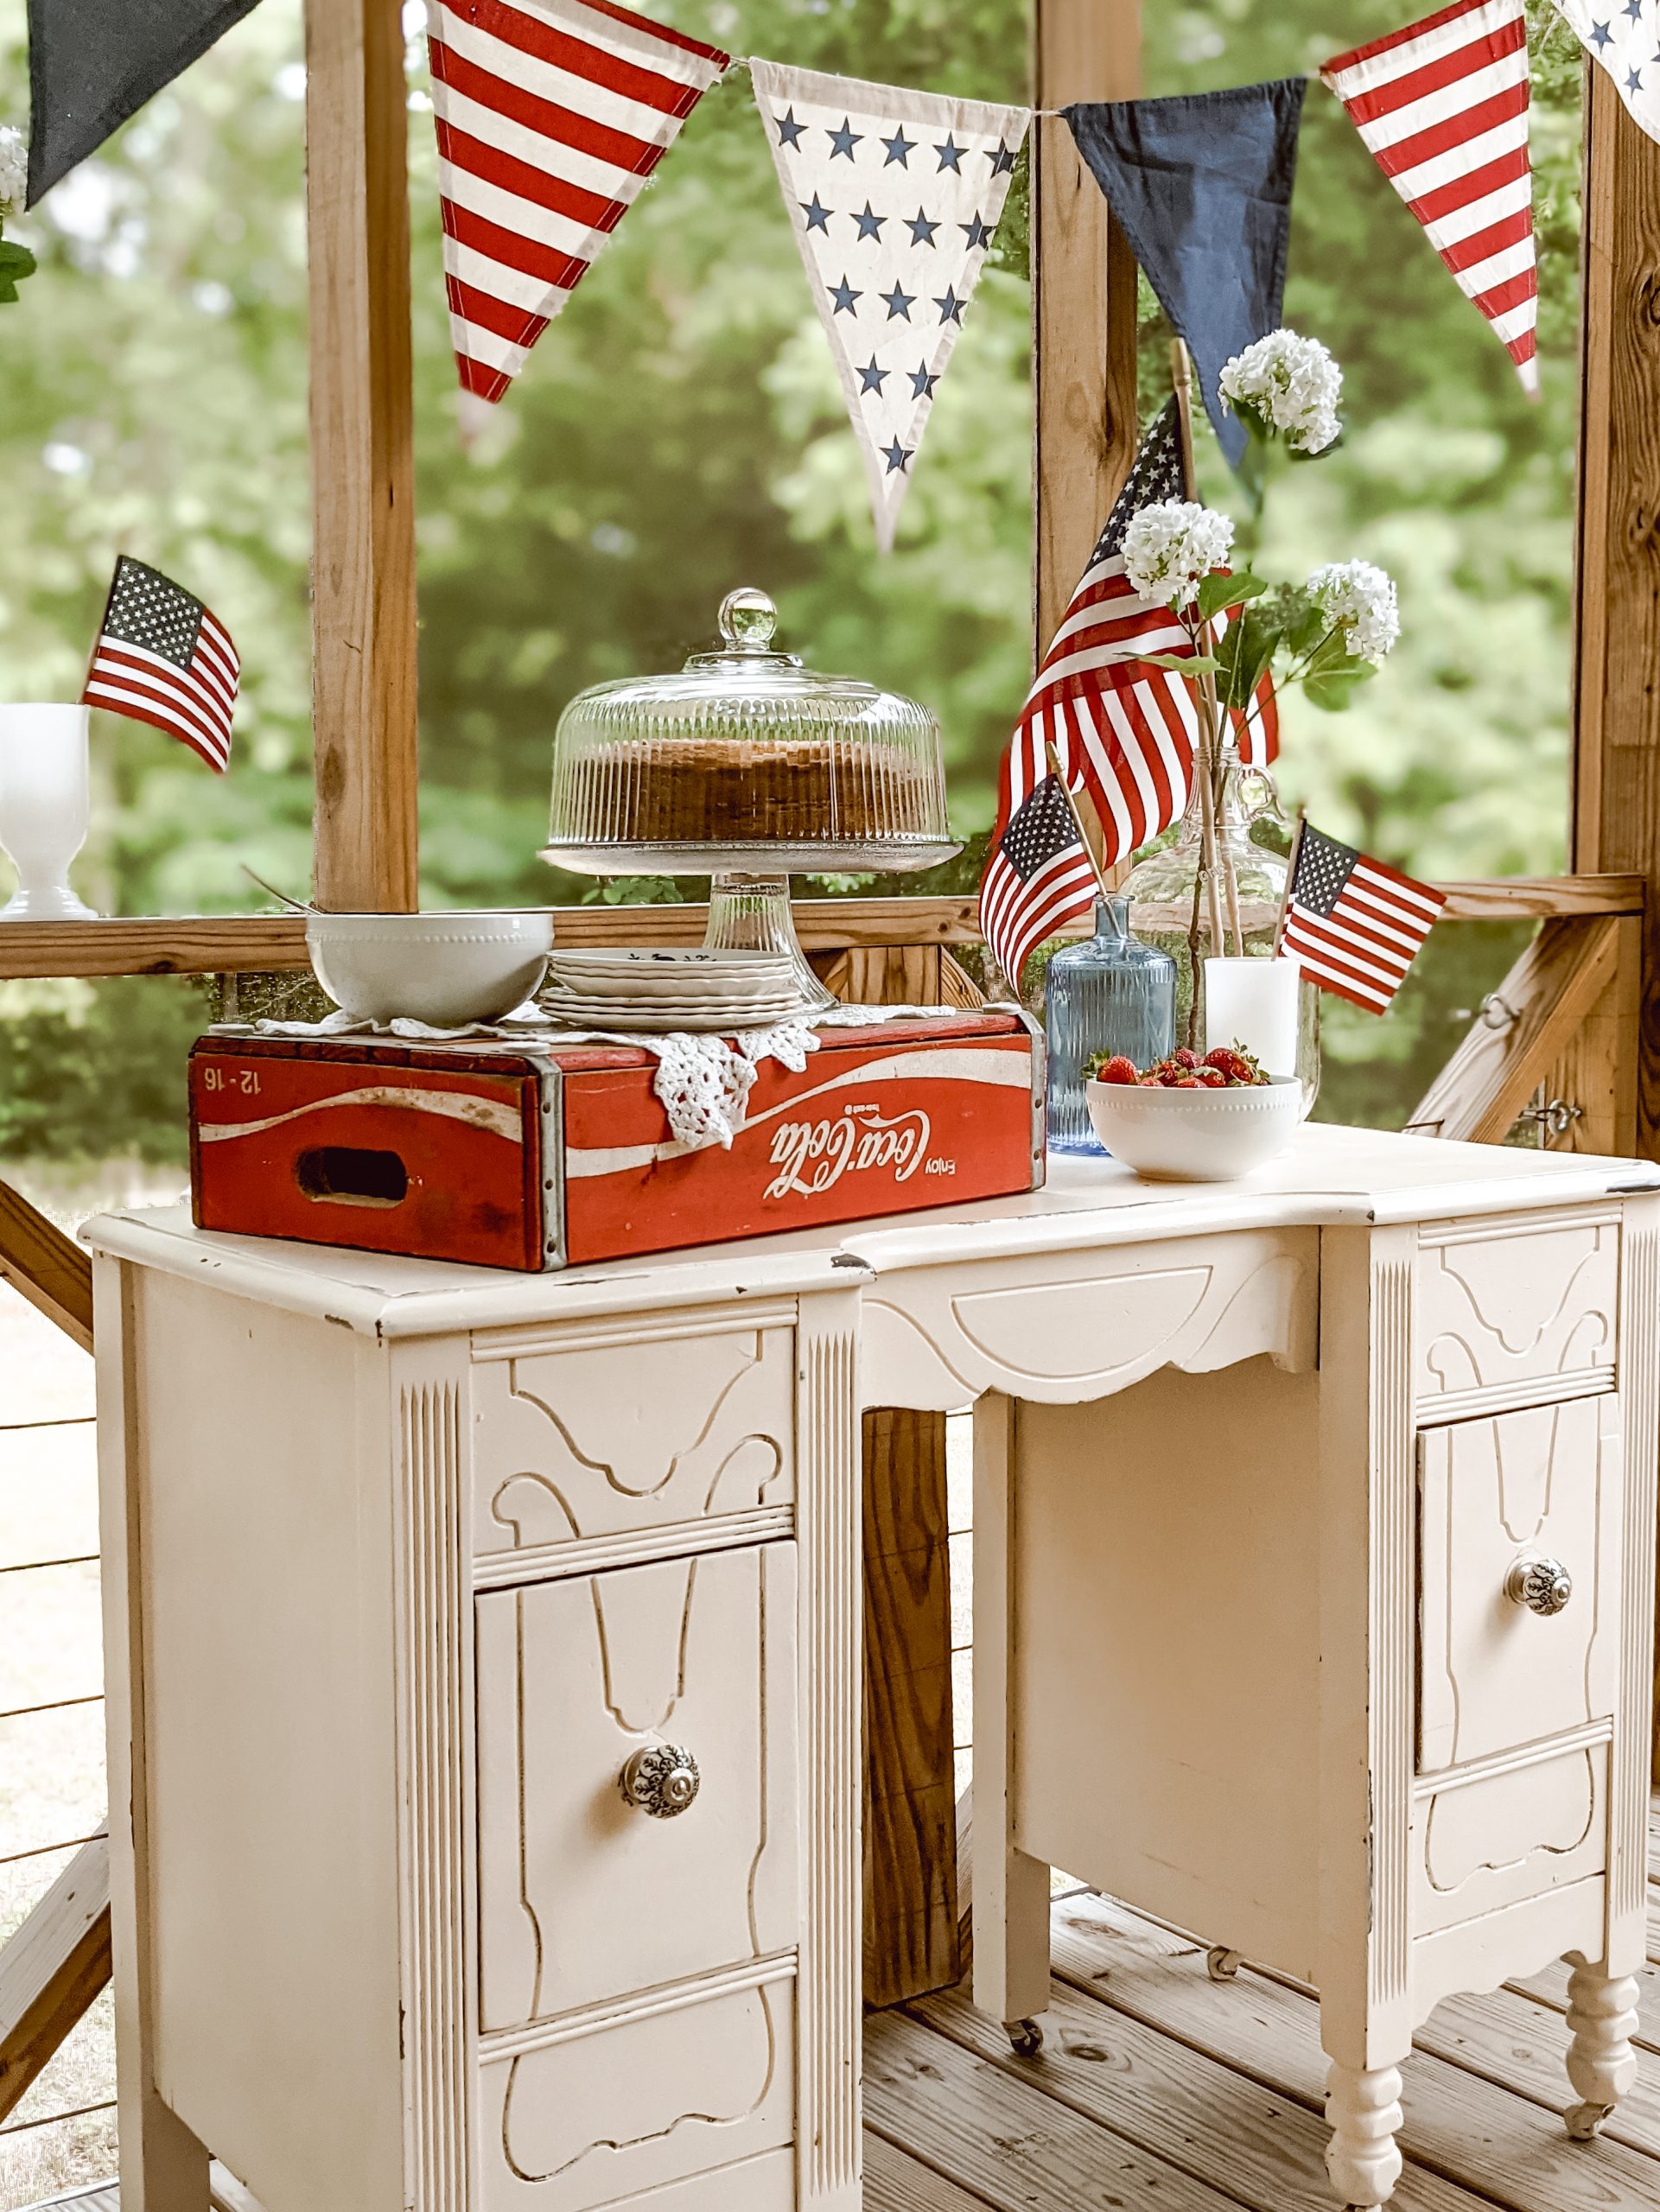 vintage coca cola crate used as a riser for the cake table